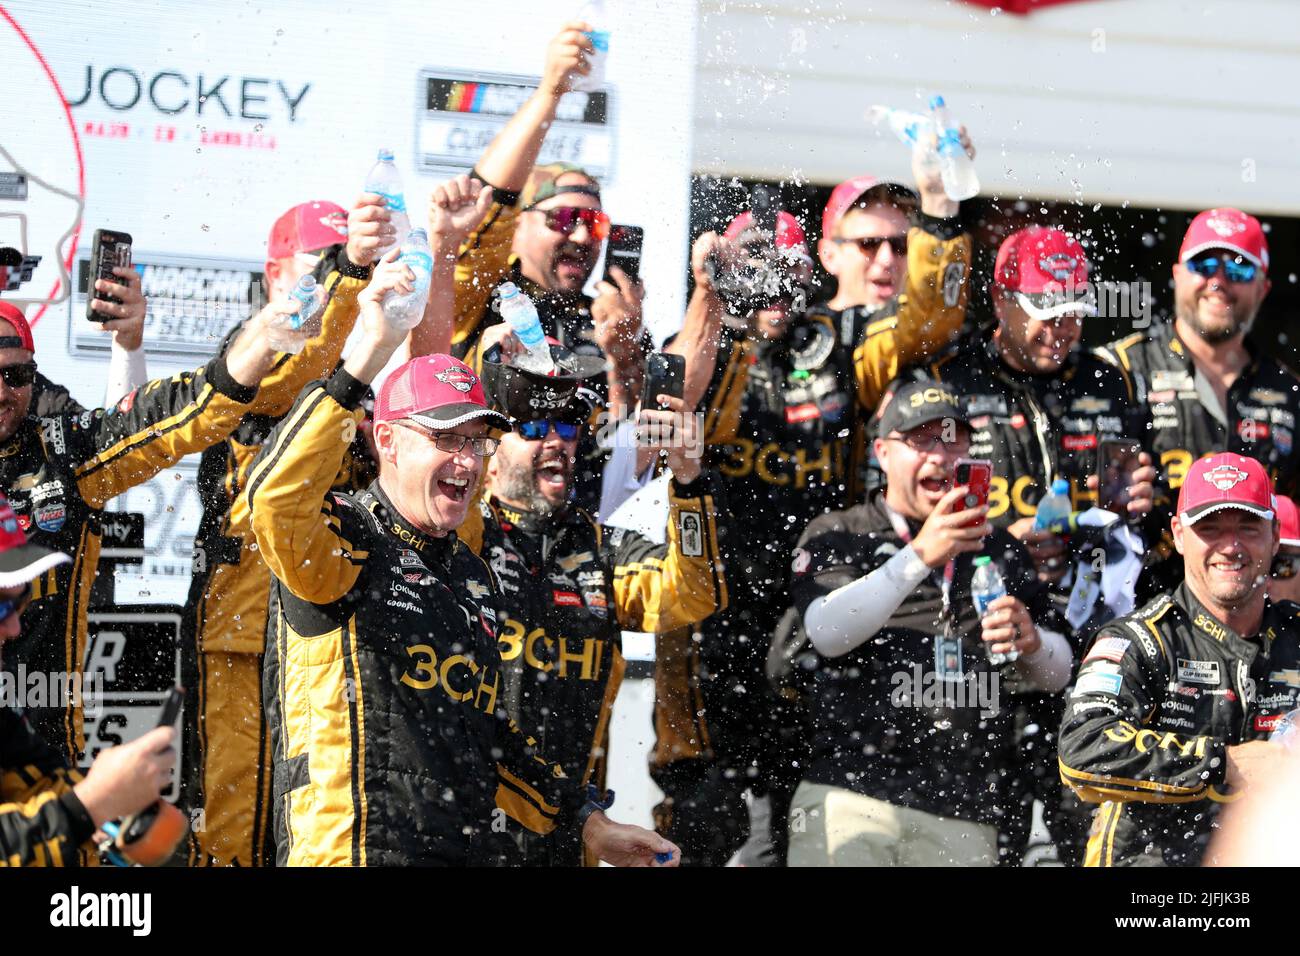 Plymouth, Wisconsin, USA. 3rd July, 2022. Team members of the #8 3CHI Chevrolet, celebrate in victory lane after winning the NASCAR Cup Series Kwik Trip 250 at Road America on July 03, 2022 in Plymouth, Wisconsin. Ricky Bassman/Cal Sport Media/Alamy Live News Stock Photo